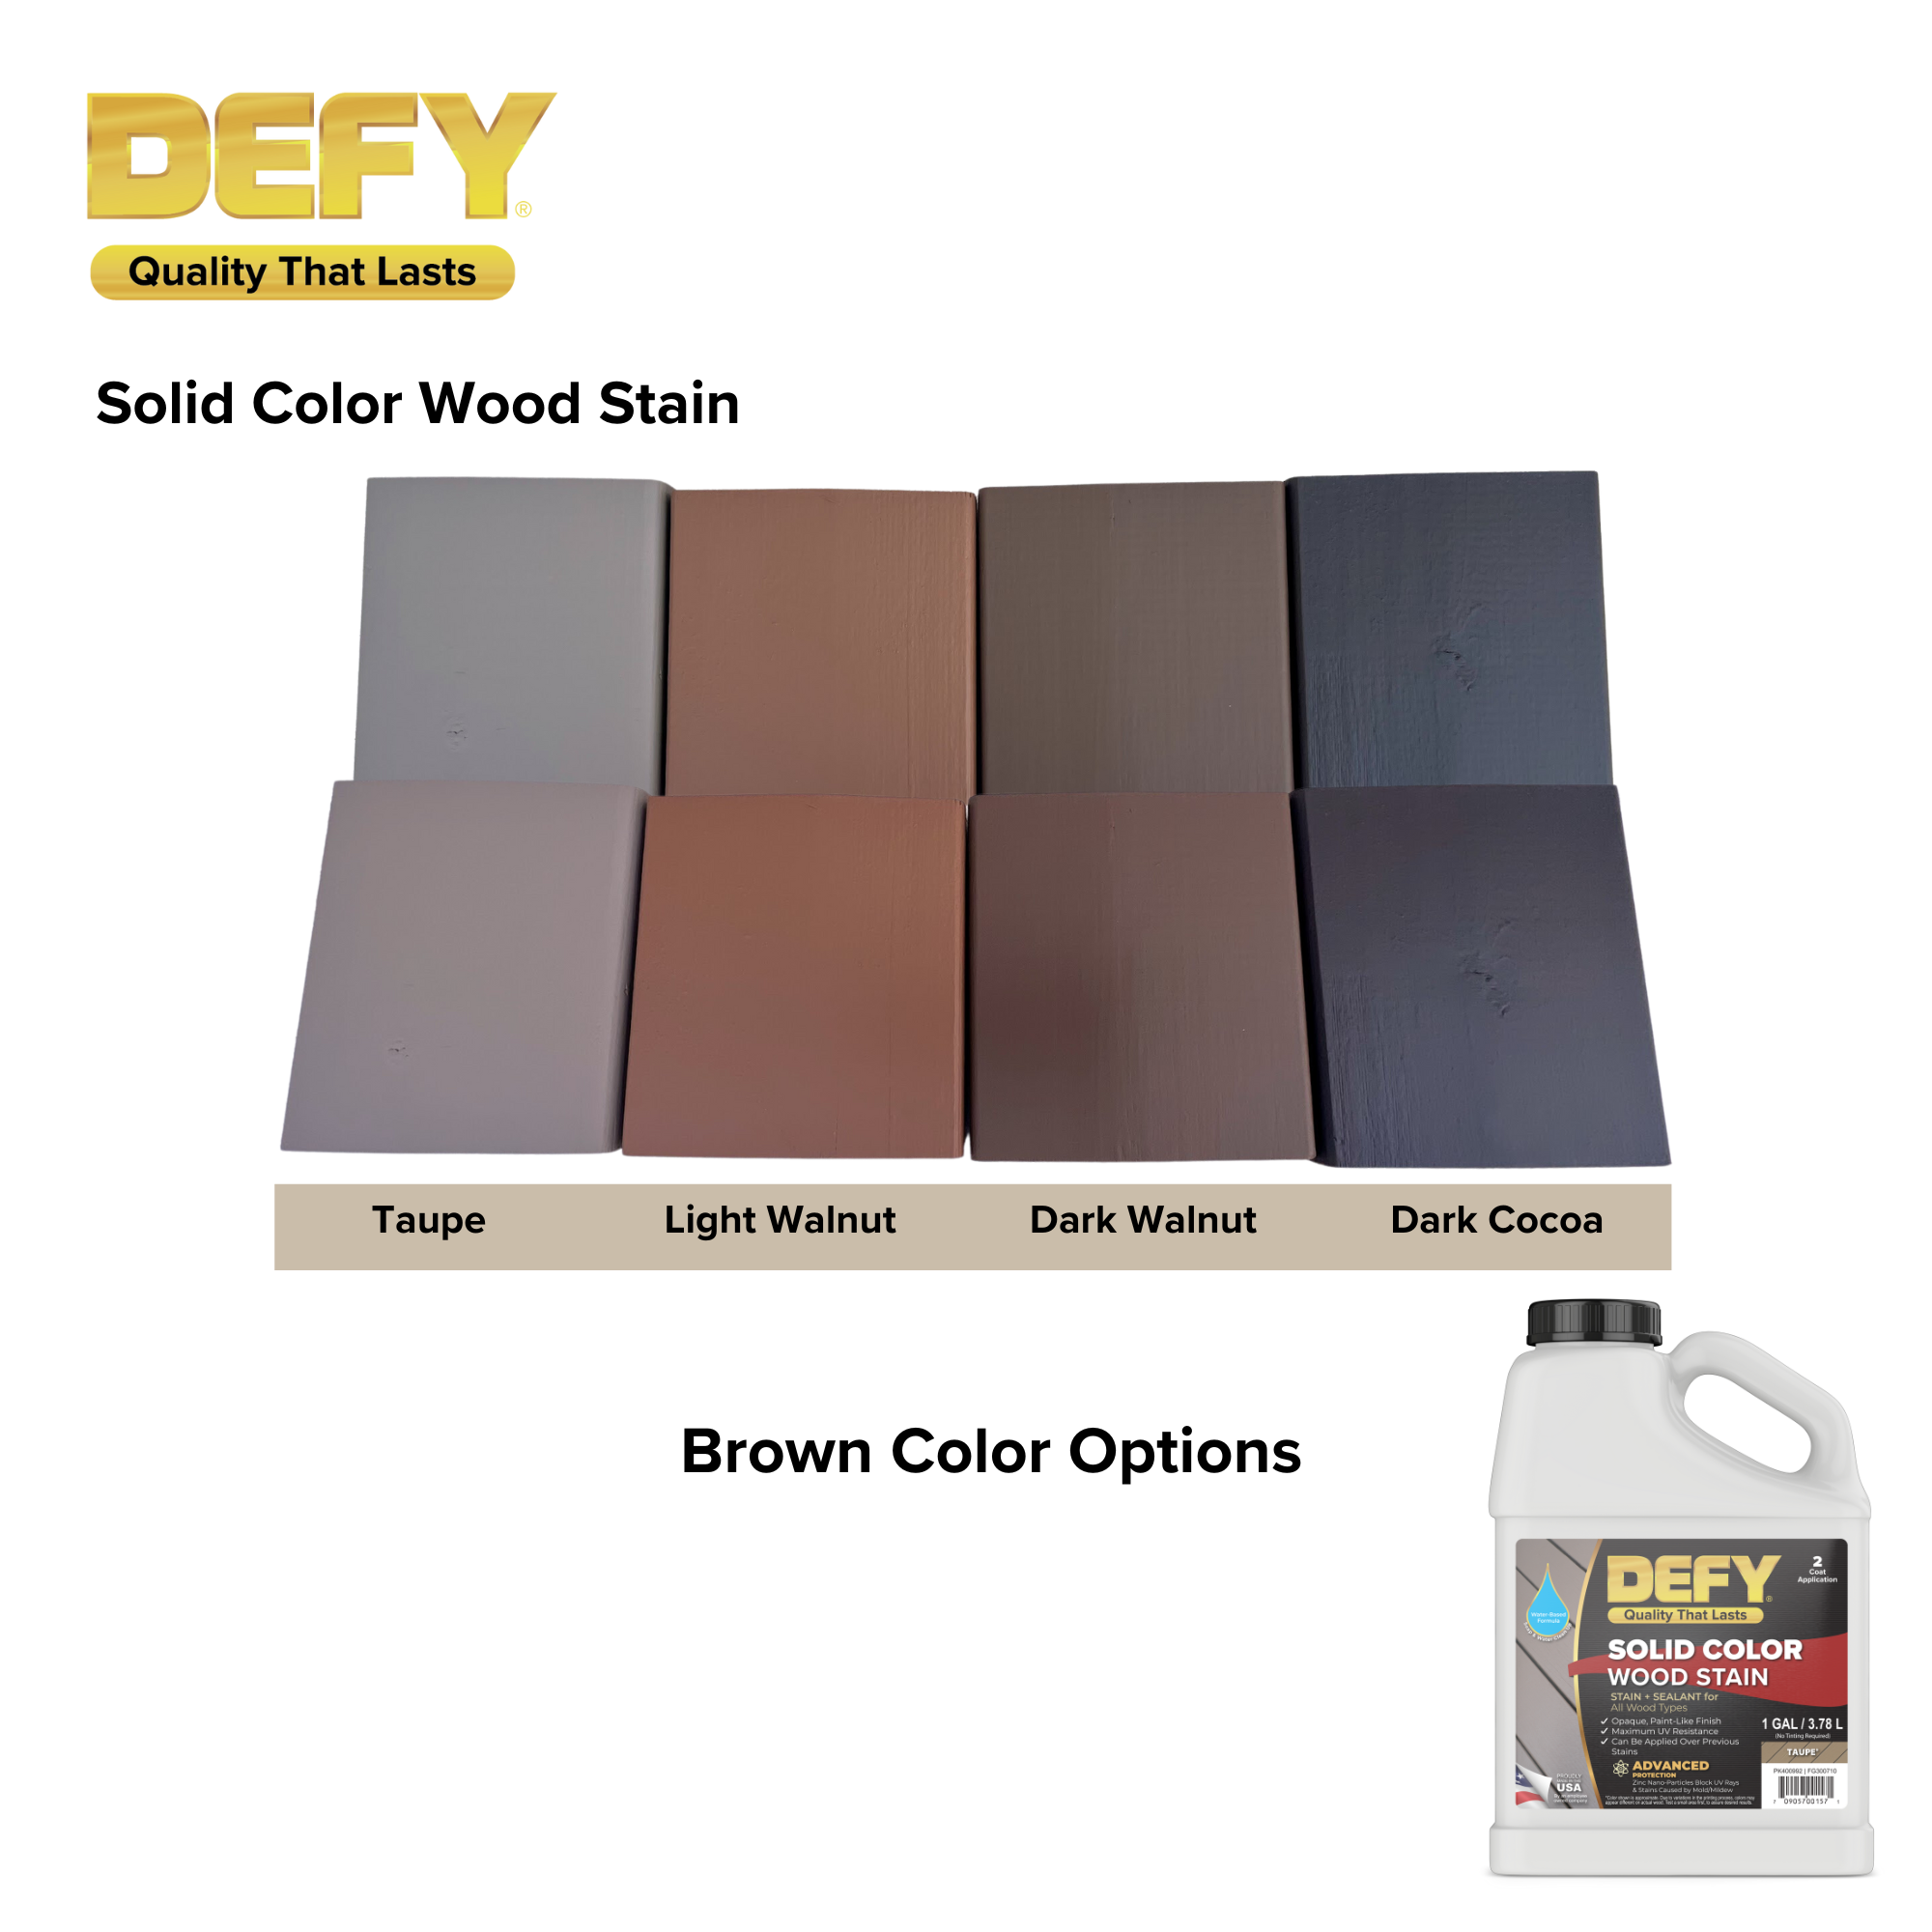 DEFY Solid Stain Samples